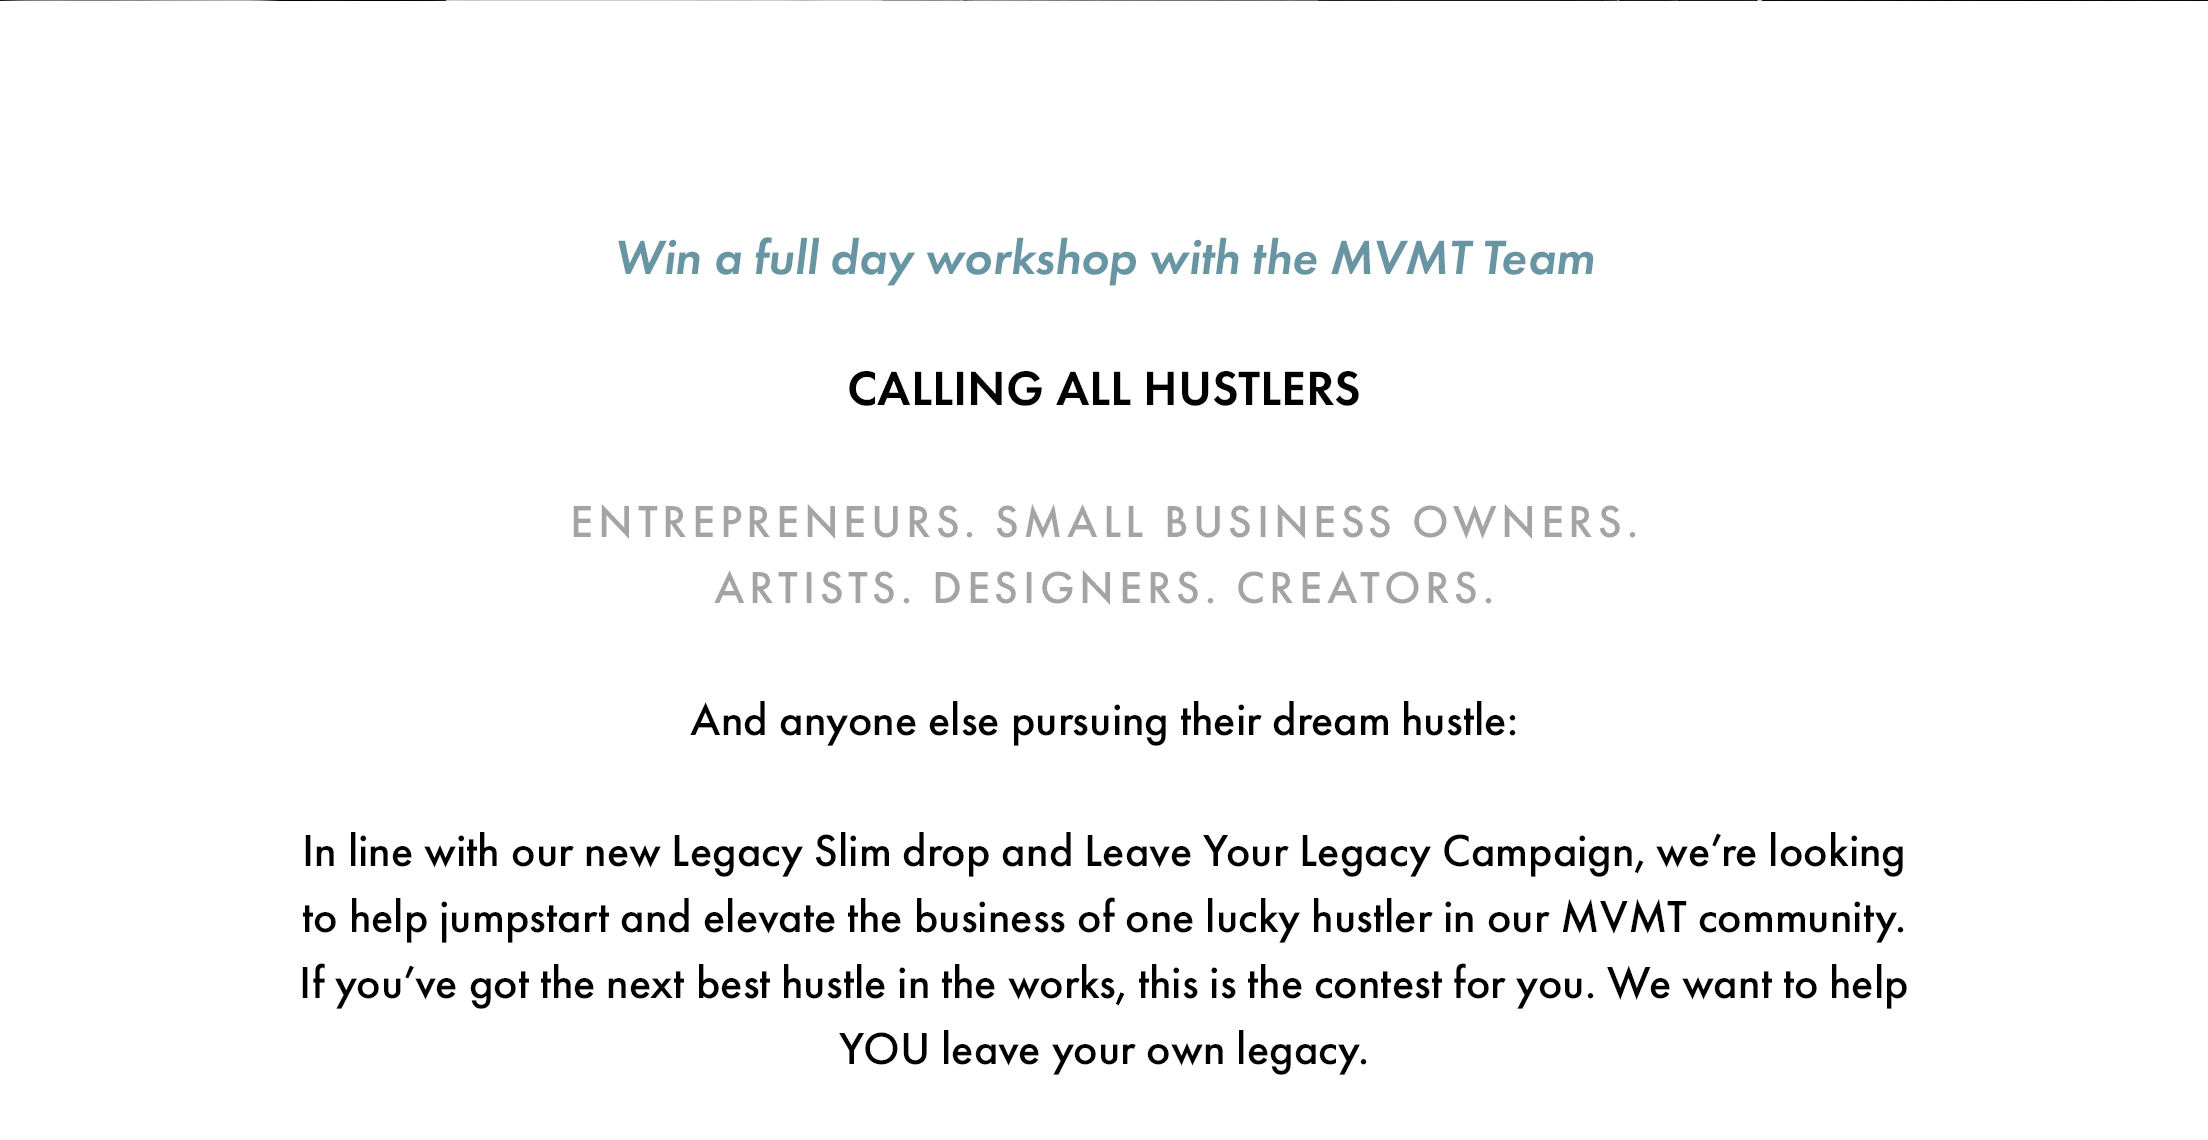 Win a full day workshop with the MVMT Team. Calling all hustlers. Entrepreneurs. Small business owners. Artists. Designers. Creators. And anyone else pursuing their dream hustle: In line with our new Legacy Slim drop and Leave Your Legacy Campaign, we're looking to help jumpstart and elevate the business of one lucky hustler in our MVMT community. If you've got the next best hustle in the works, this is the contest for you. We want to help YOU leave your own legacy.